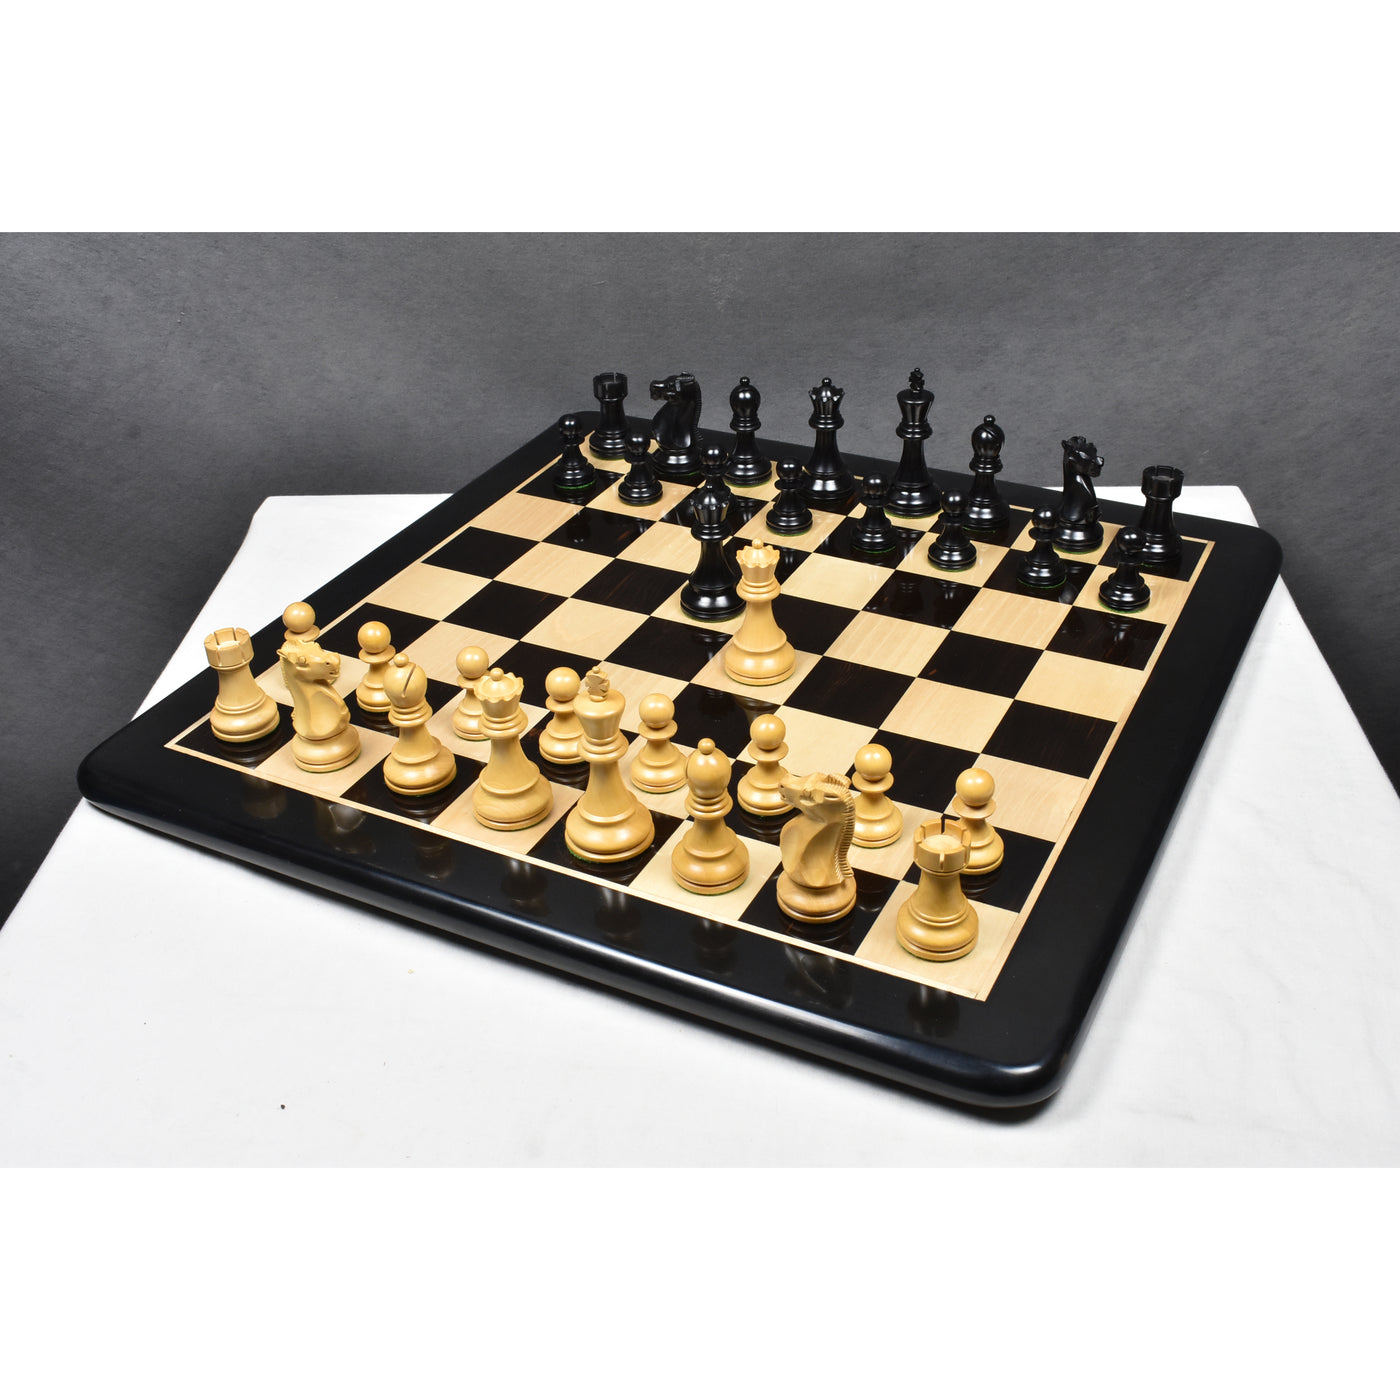 1972 Championship Fischer Spassky Chess Pieces Set | Chess Pieces Only | Royalchessmall